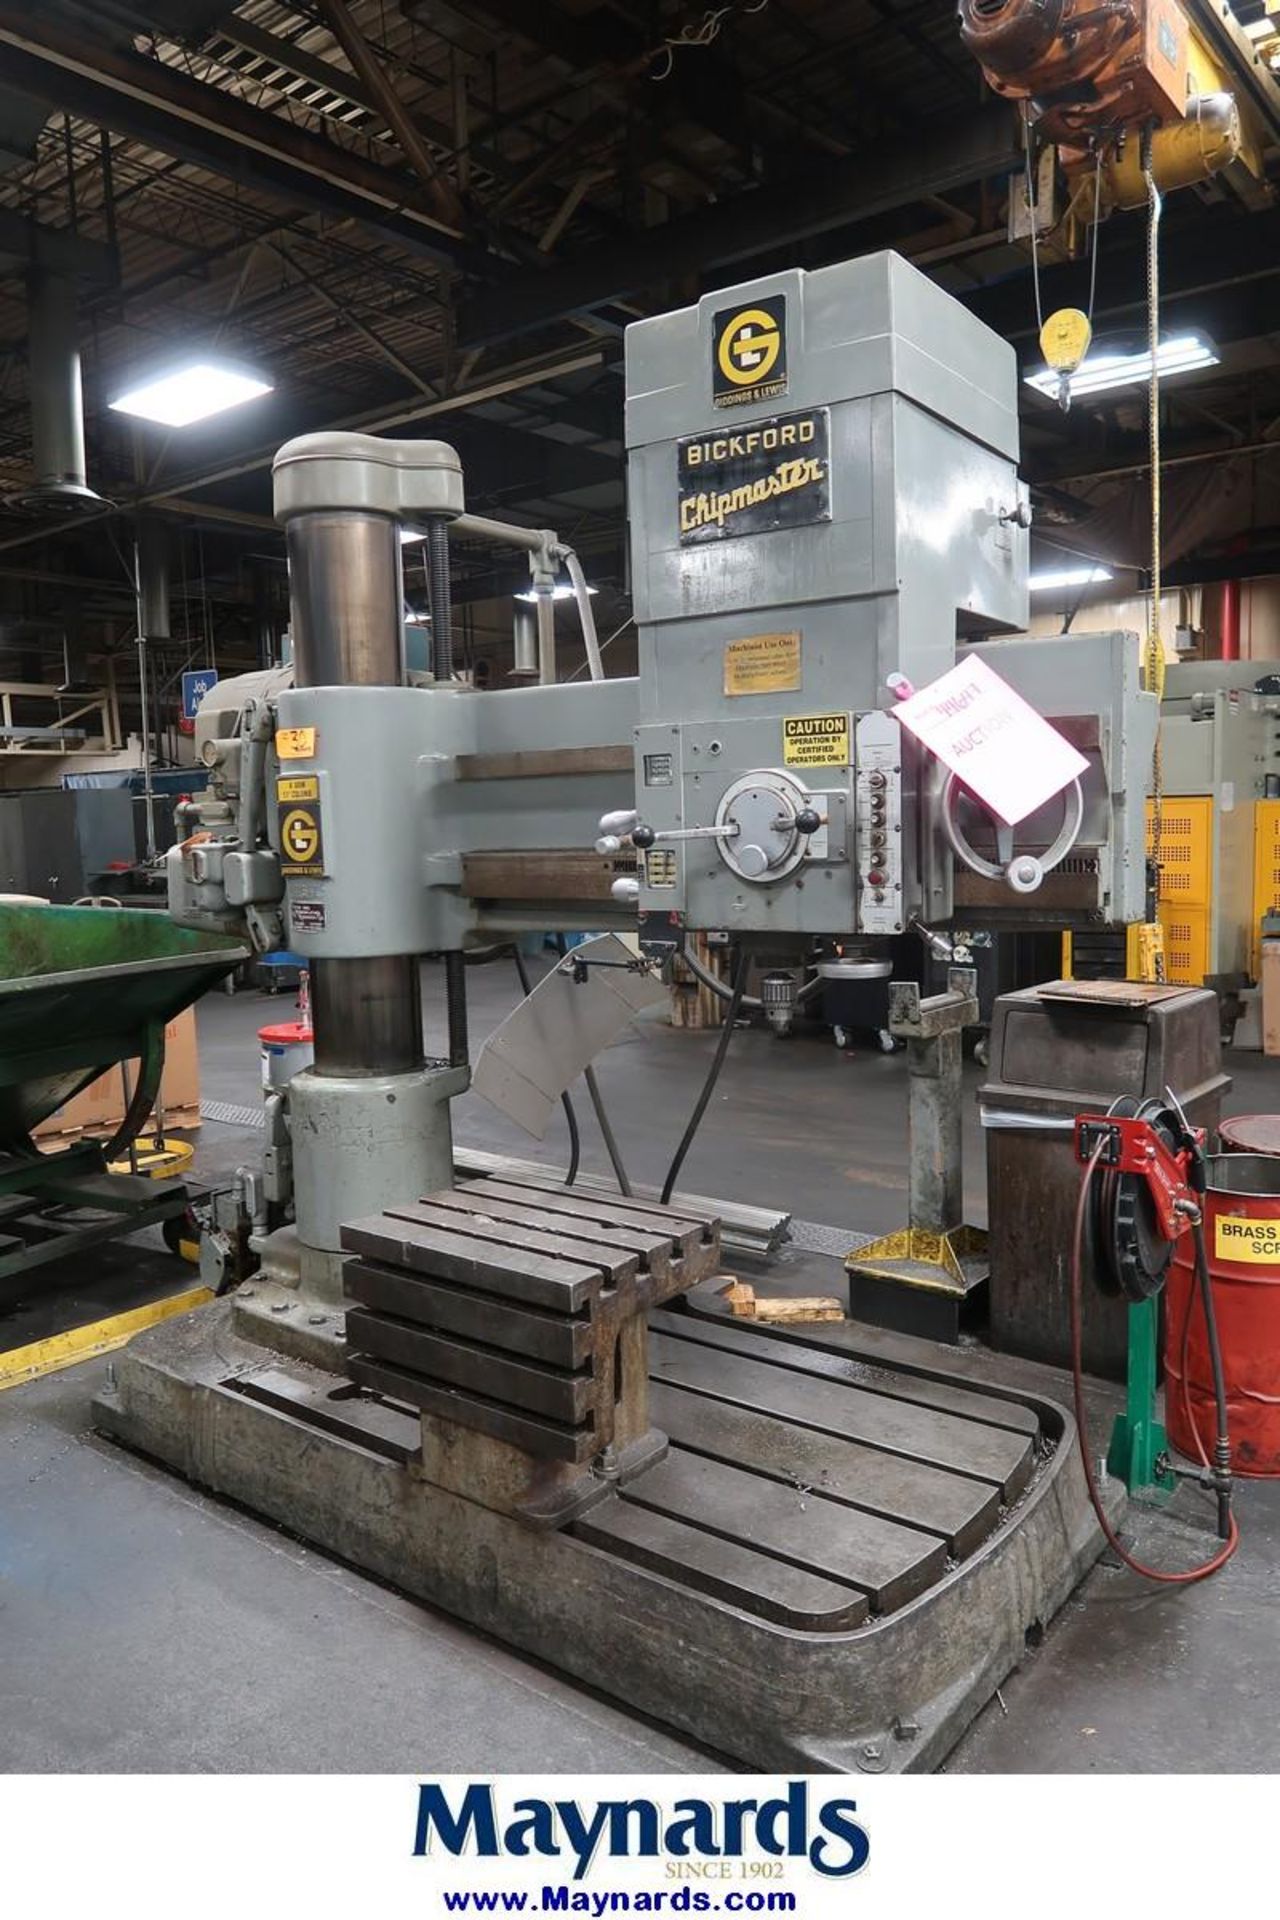 Gidding & Lewis Bickford Chip master 4' Arm x 11" Column Radial Arm Drill - Image 2 of 7